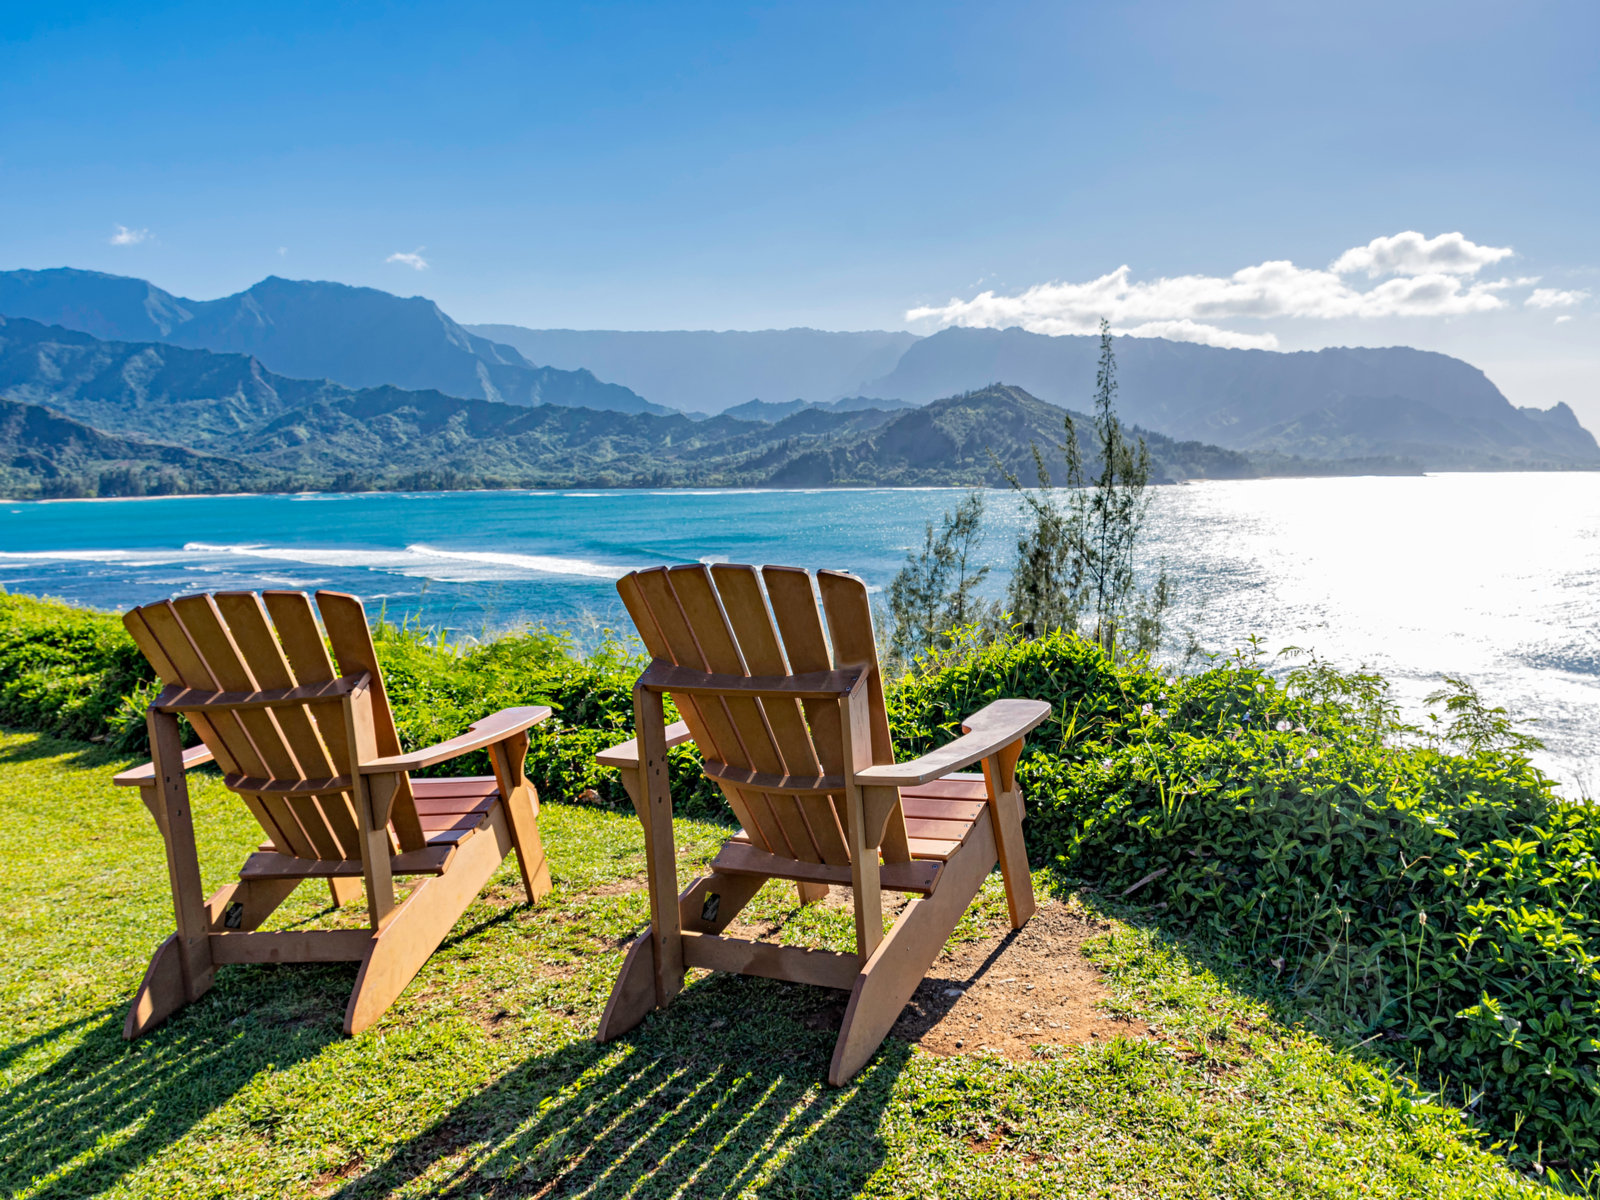 Adirondack chairs overlooking the ocean on a sunny day in one of the best hotels in Kauai